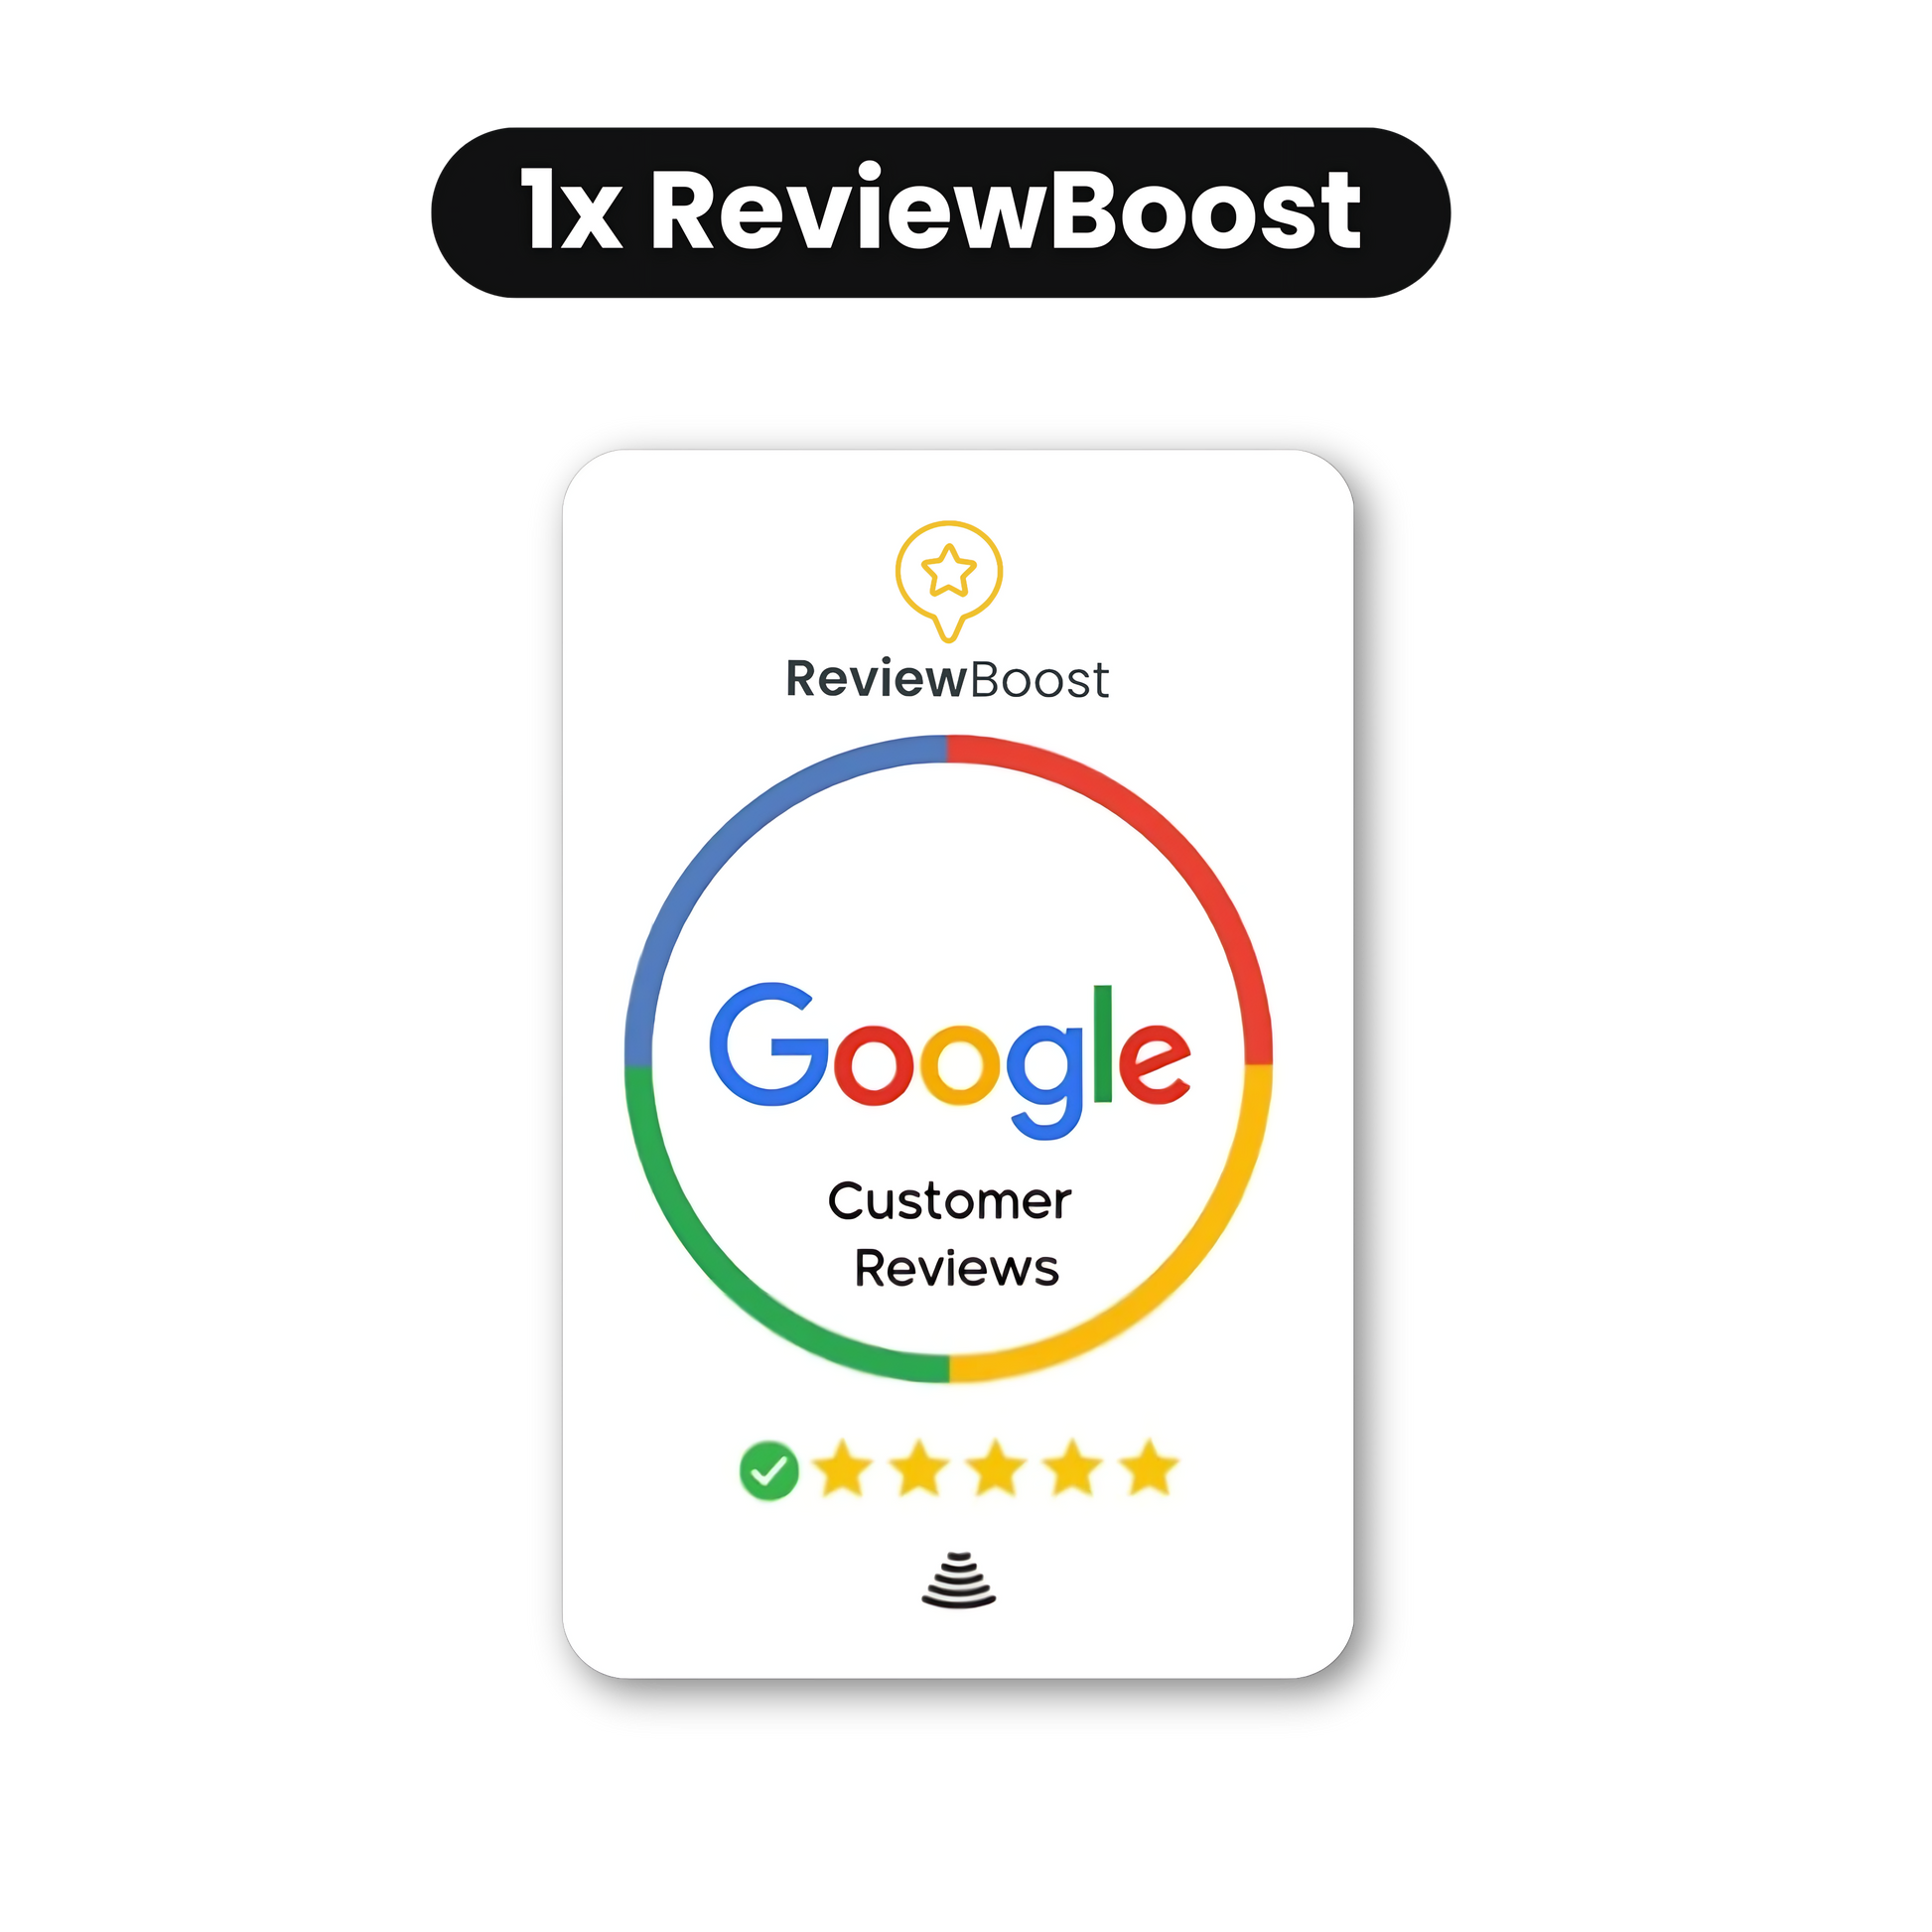 1 ReviewBoost Google Review NFC Cards